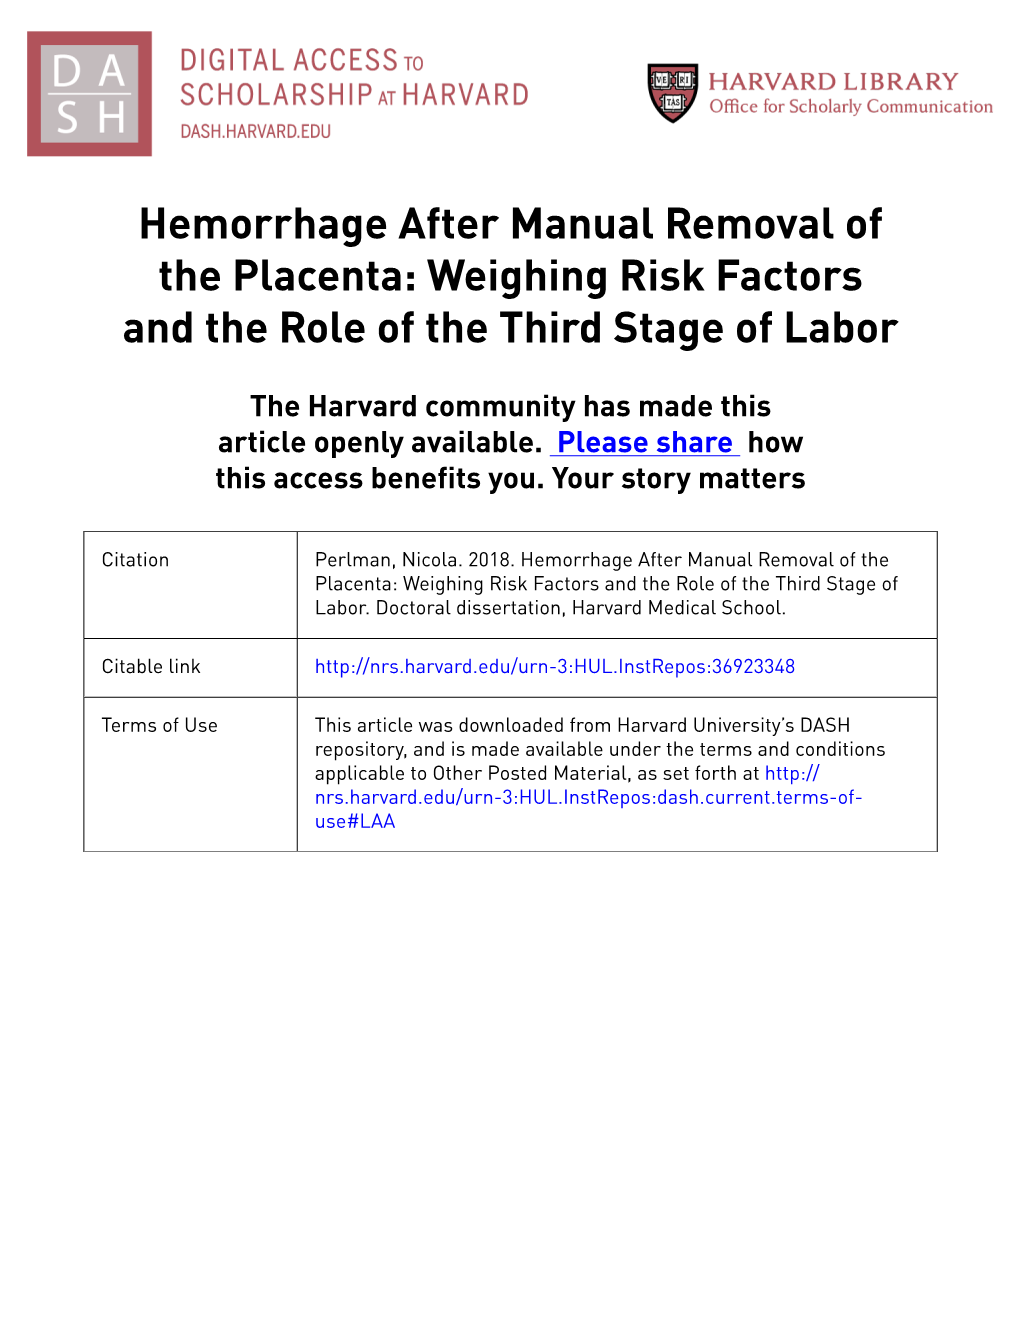 Weighing Risk Factors and the Role of the Third Stage of Labor